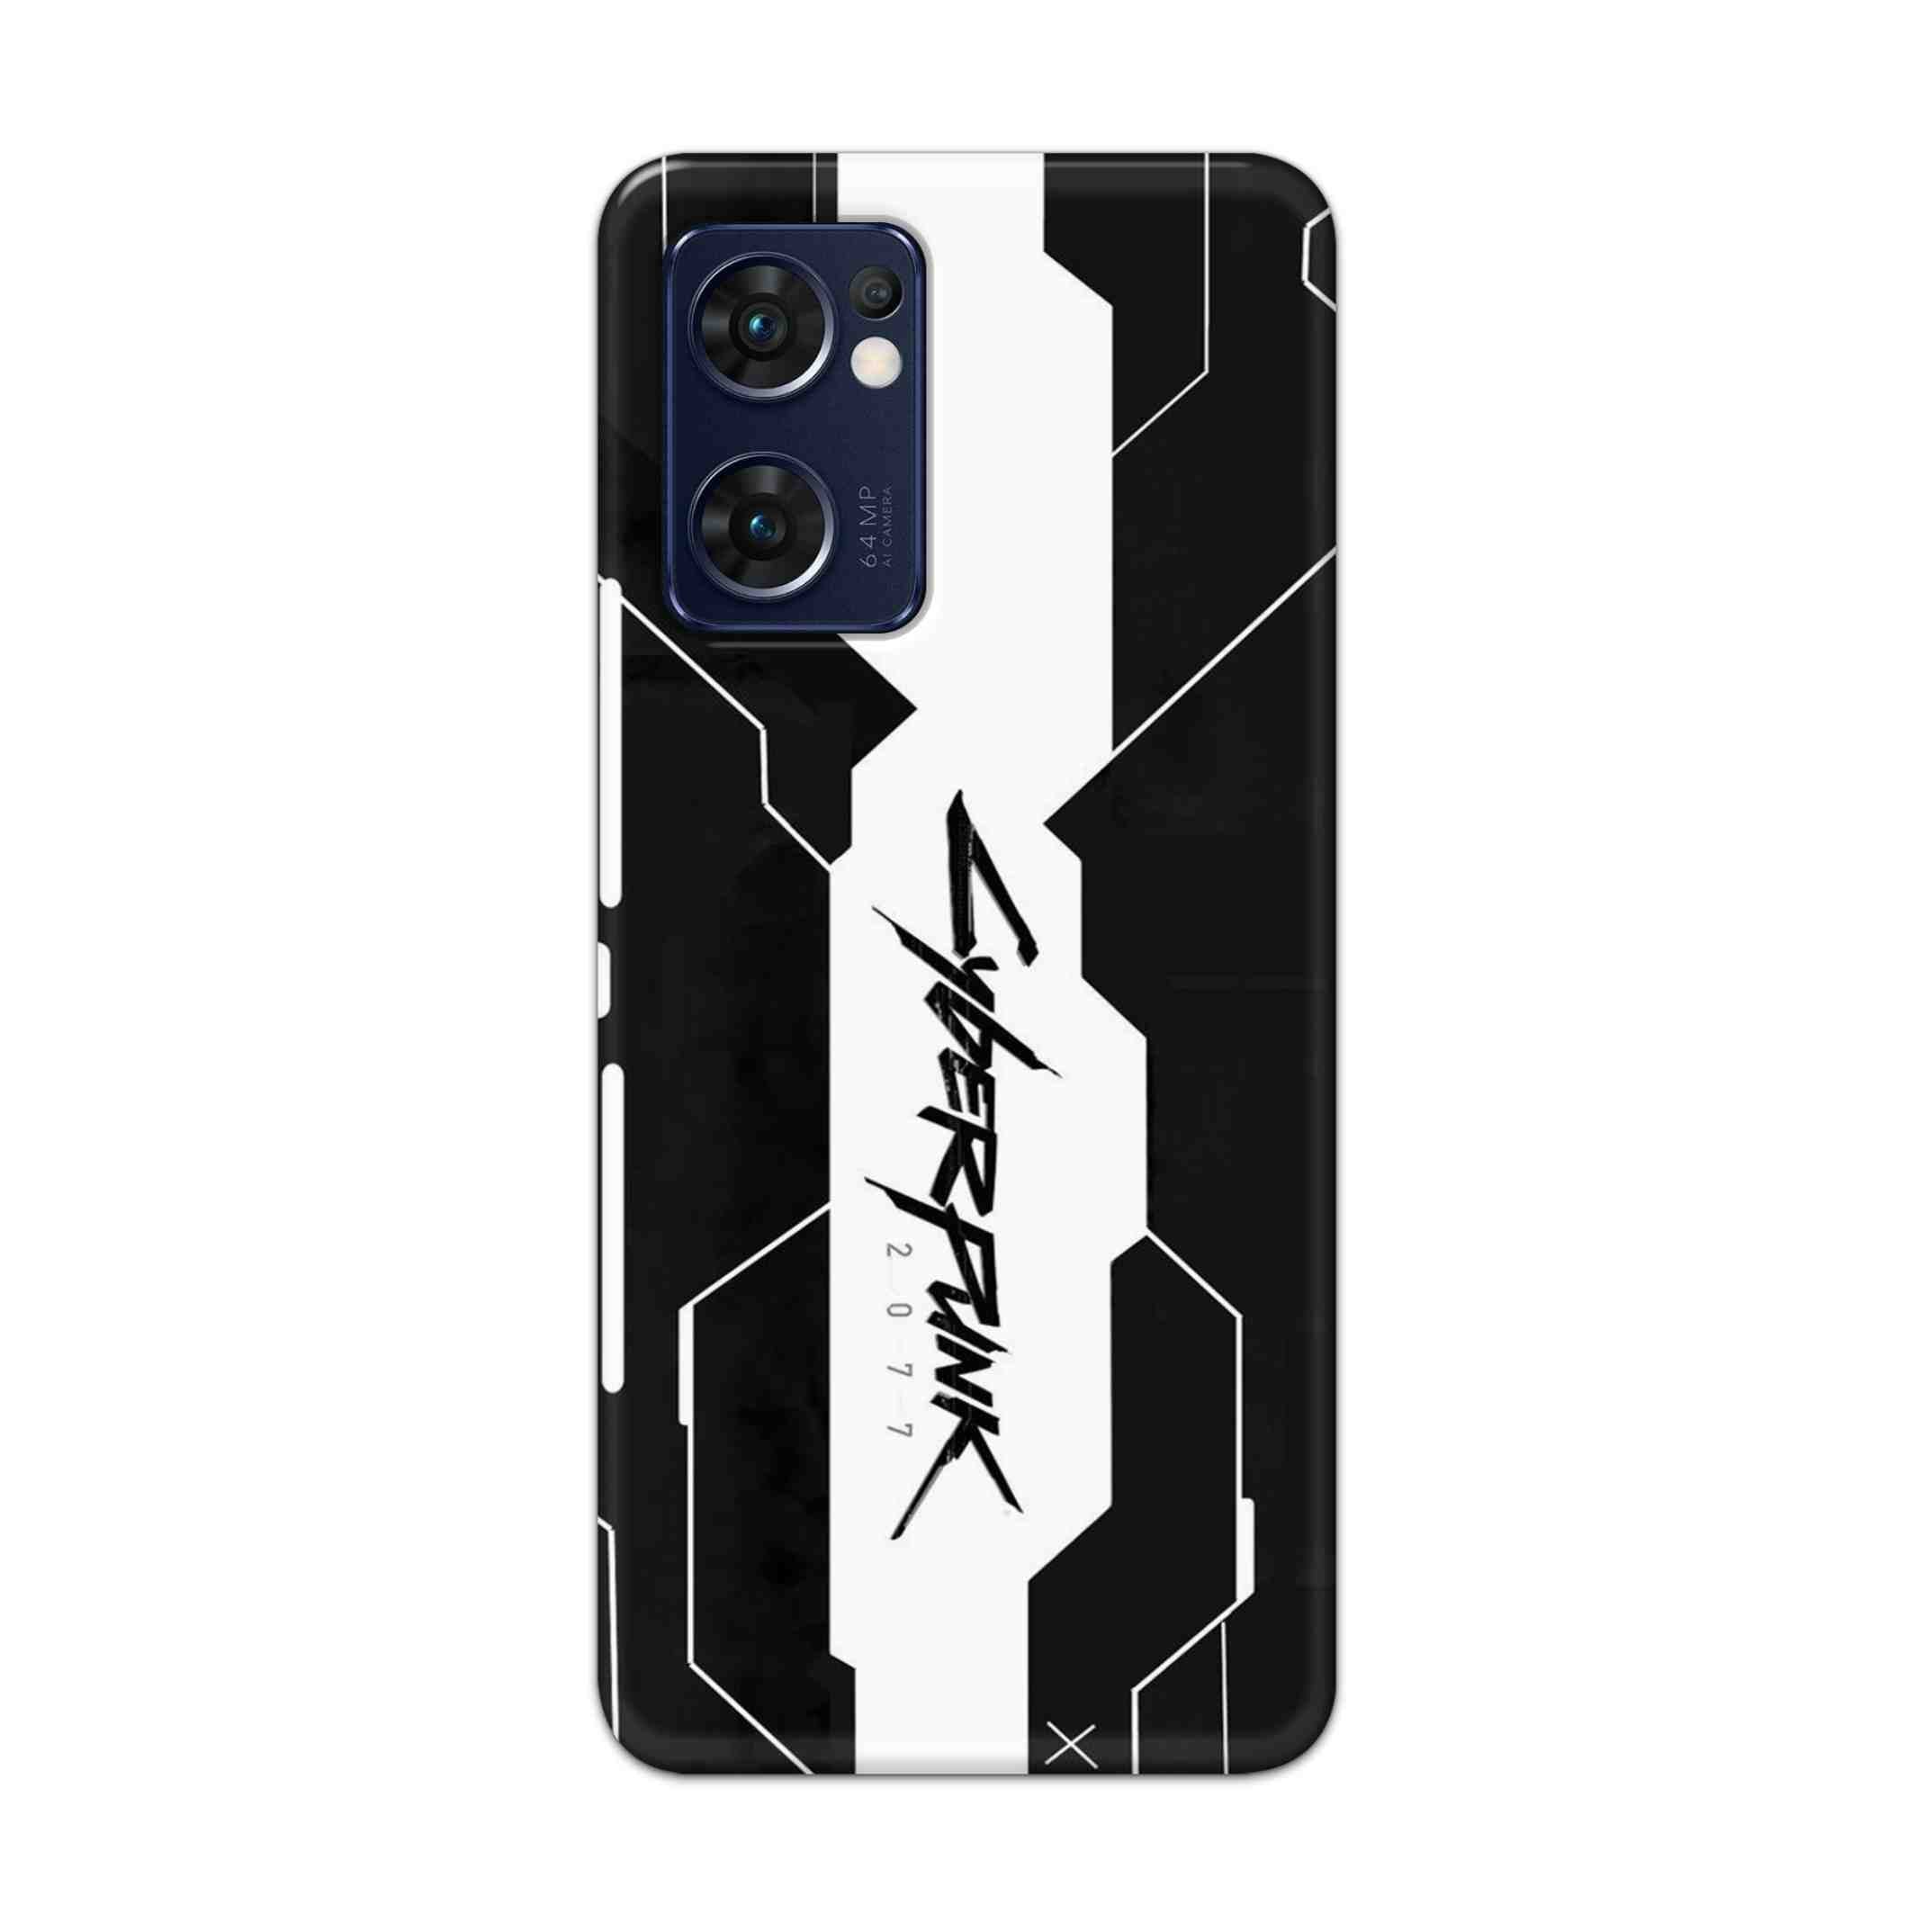 Buy Cyberpunk 2077 Art Hard Back Mobile Phone Case Cover For Reno 7 5G Online